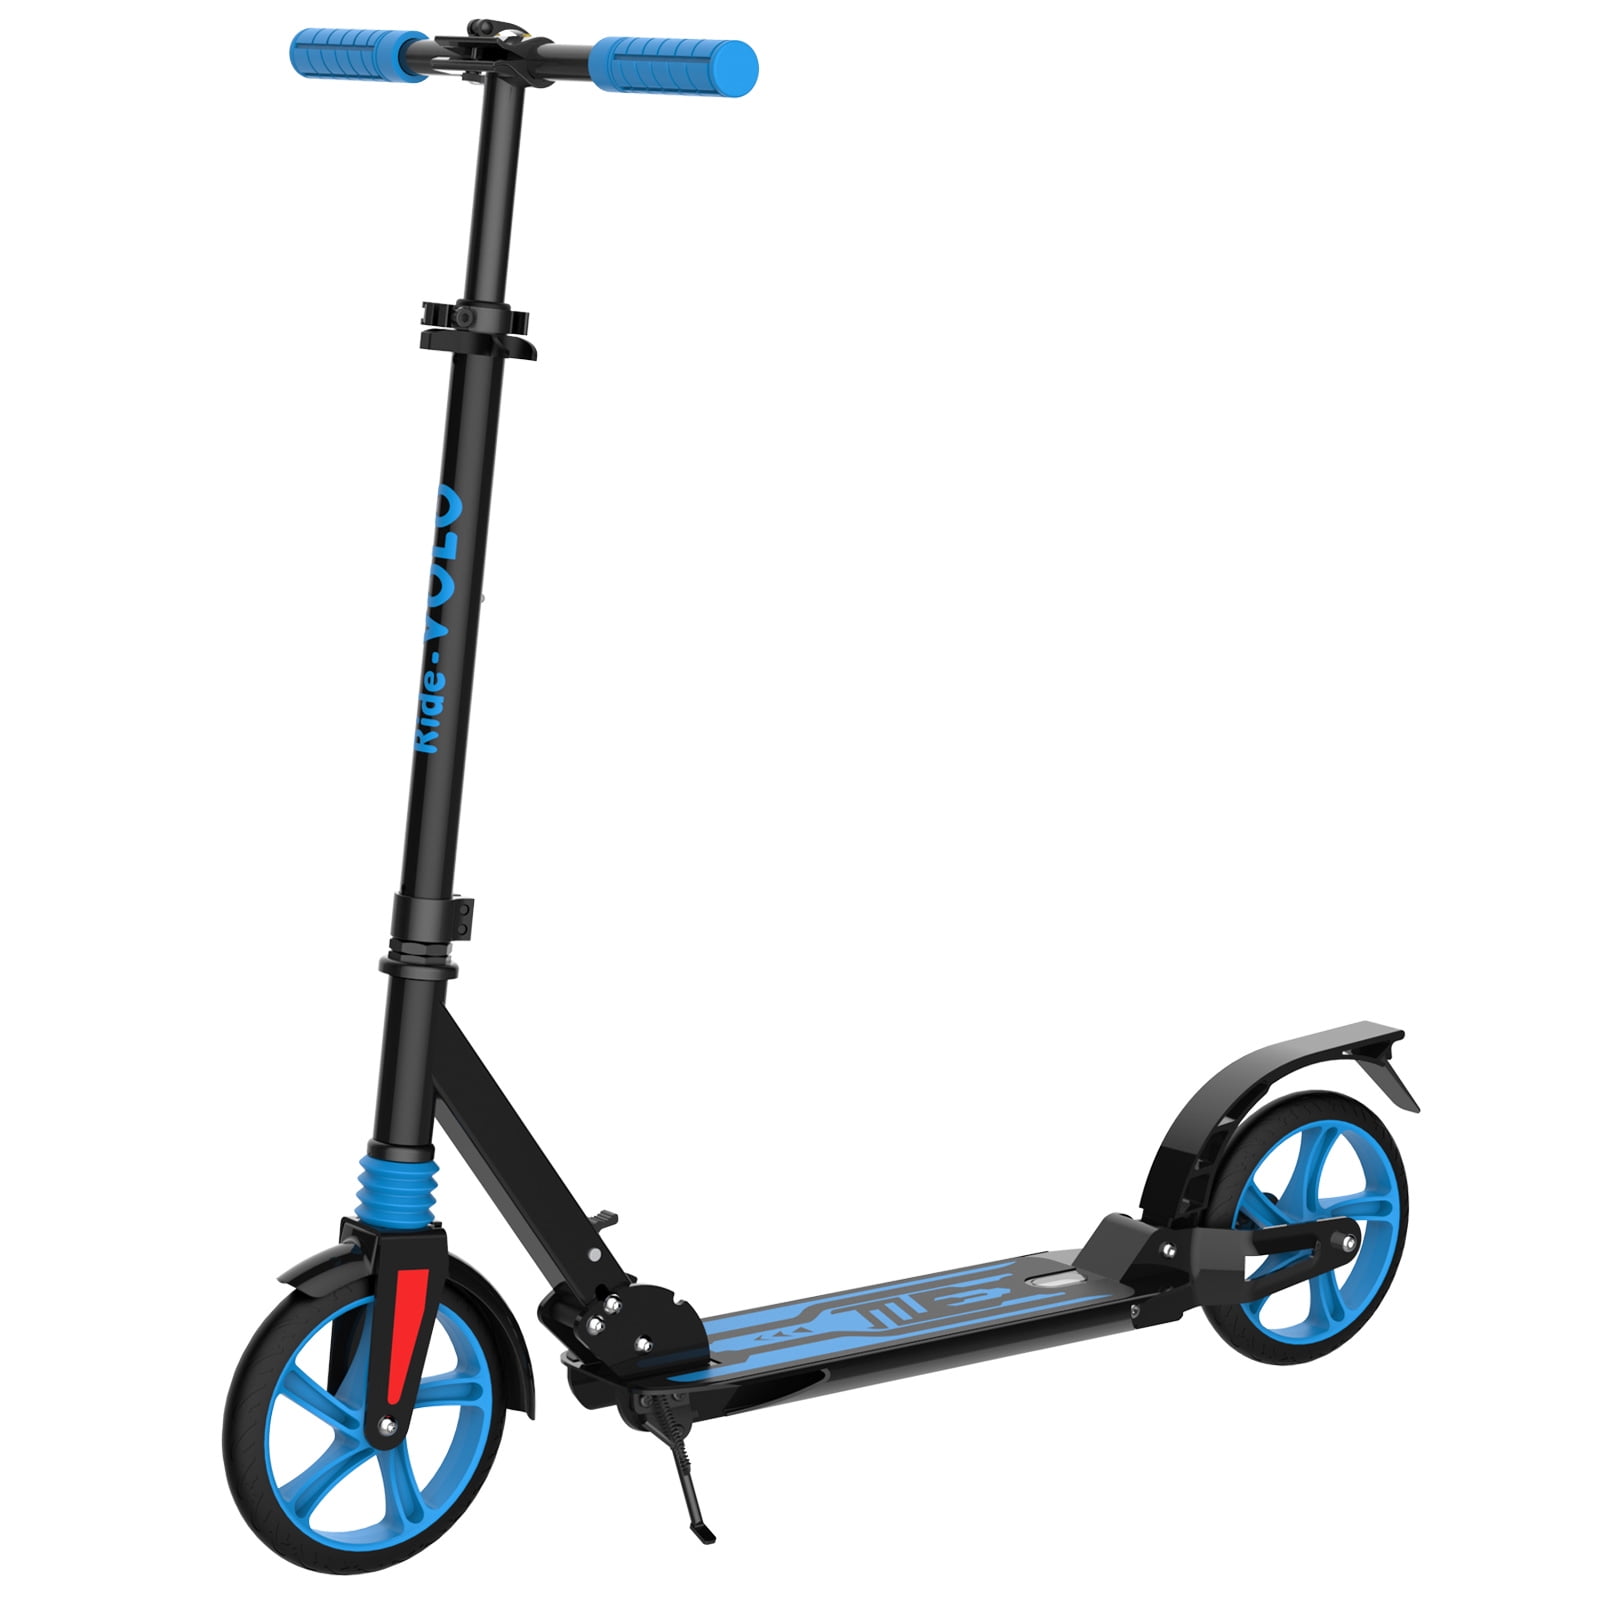 Years Old with 8inch Wheels and 3 Adjustable Height RideVOLO K08 Kick Scooter for 8 Folding System and Suspension System